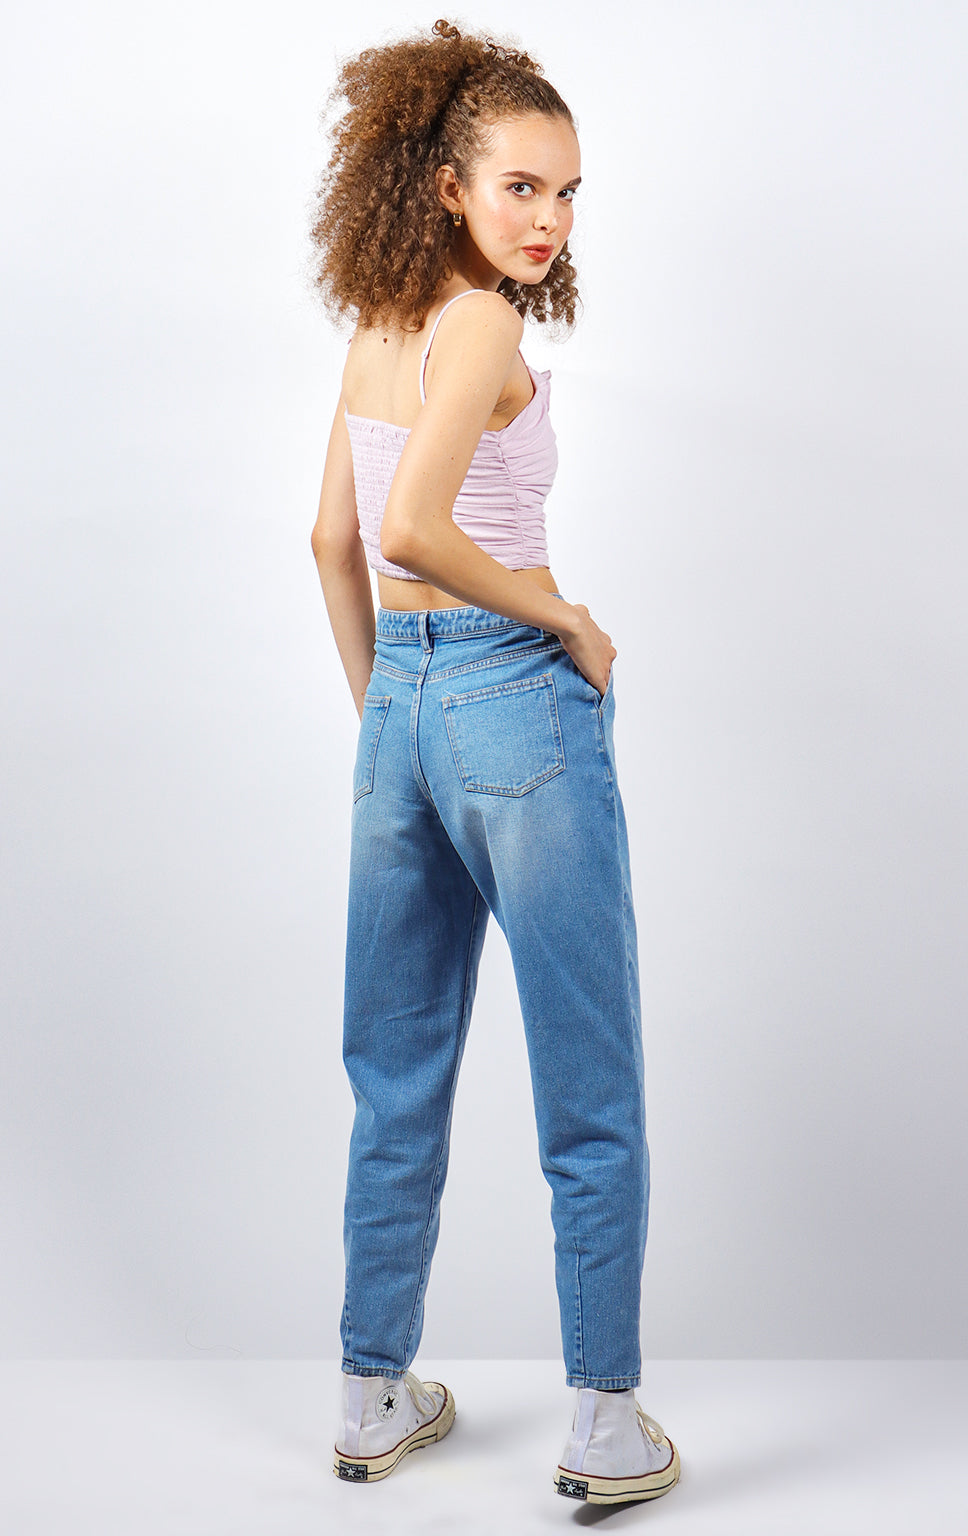 HIGH WAISTED BALOON FIT DENIM JEANS WITH PLEATS